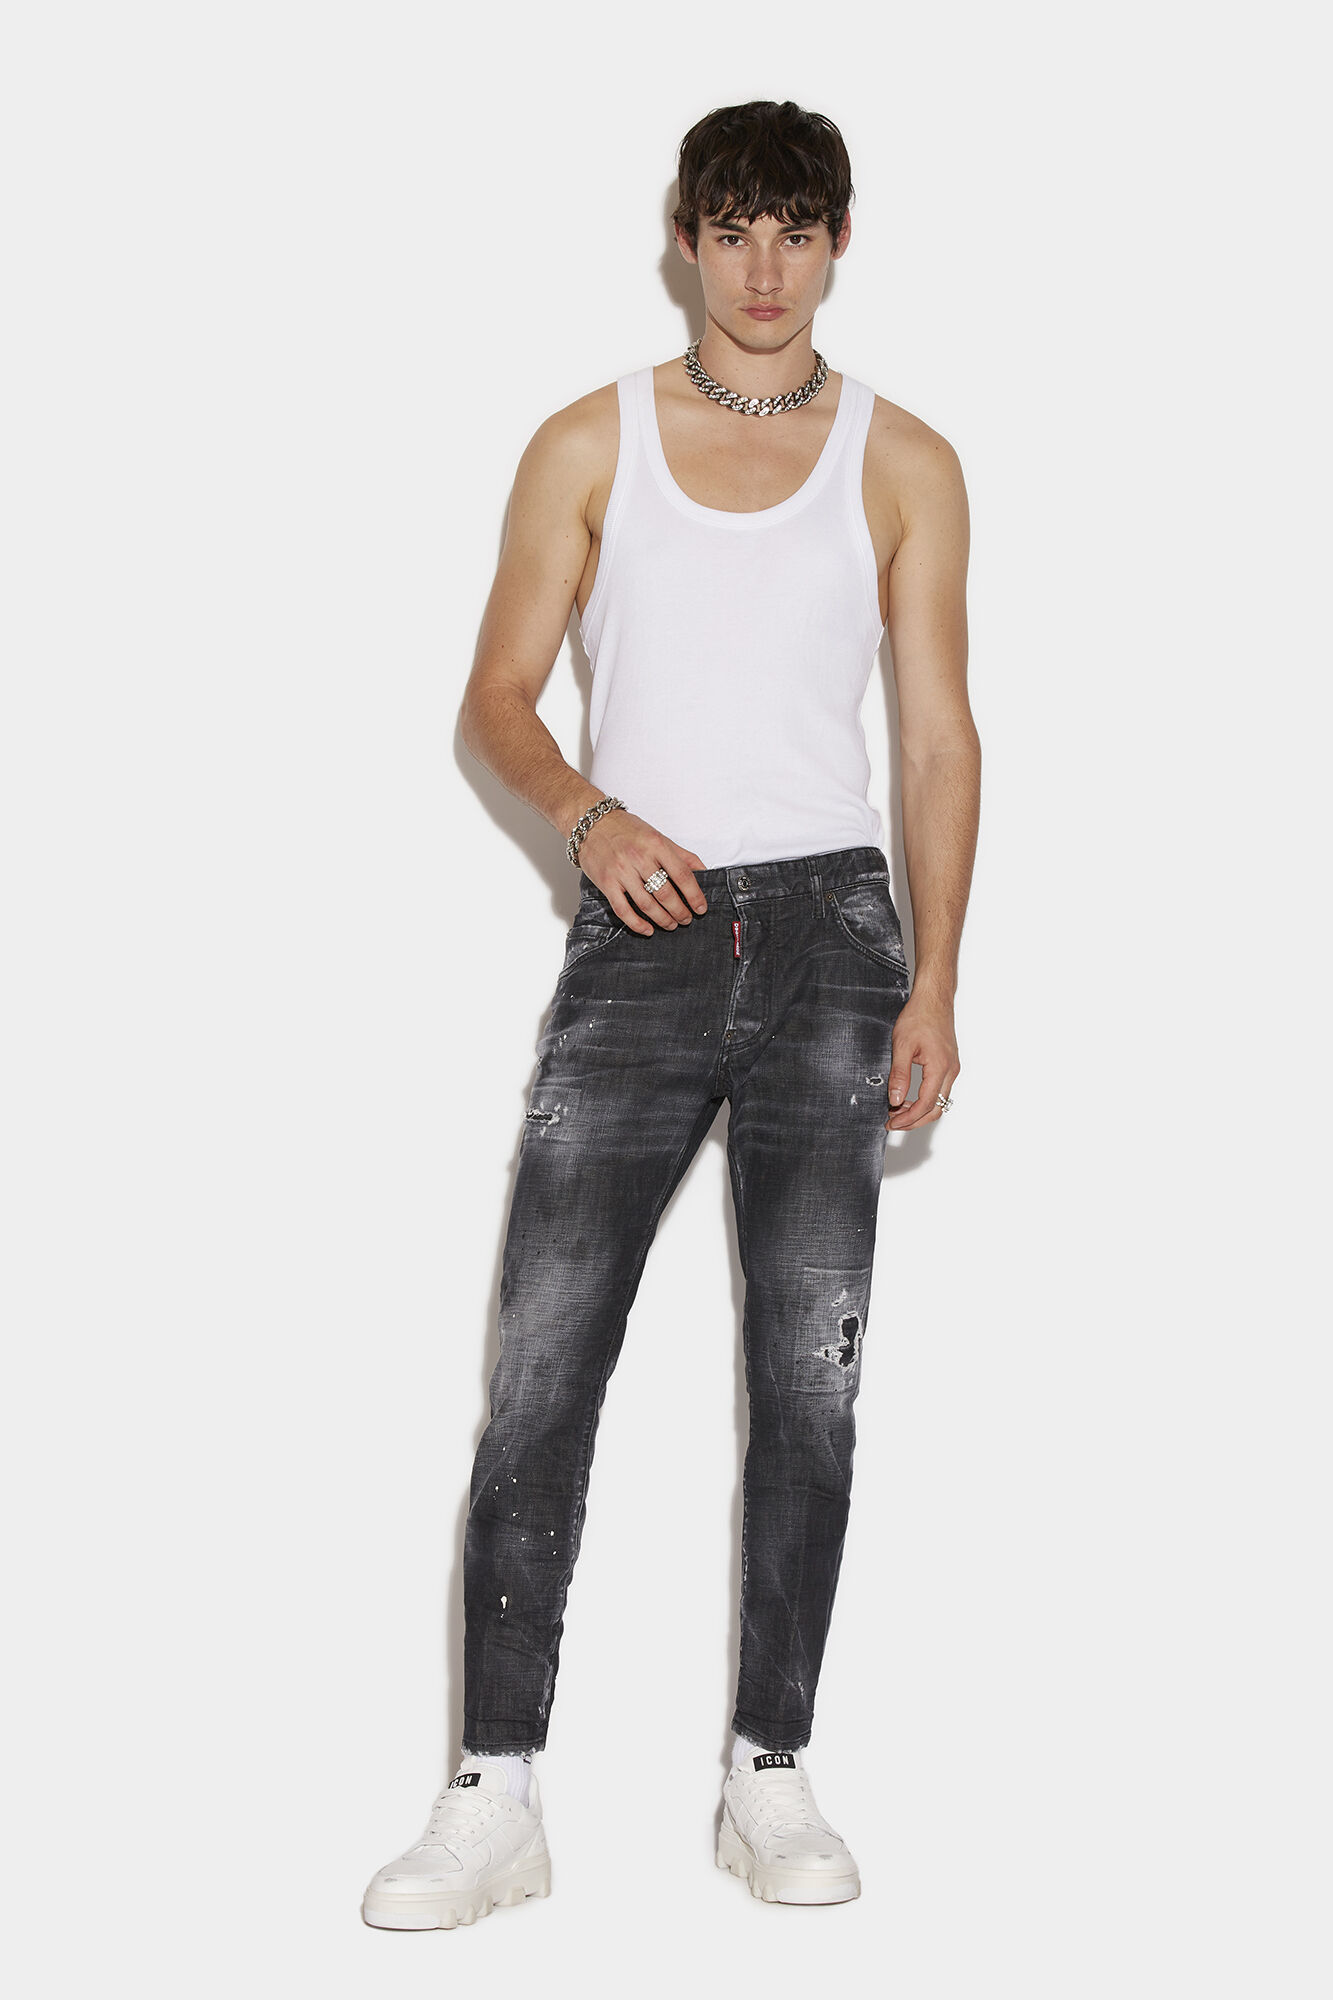 Women's Black Ripped & Distressed Jeans | Nordstrom